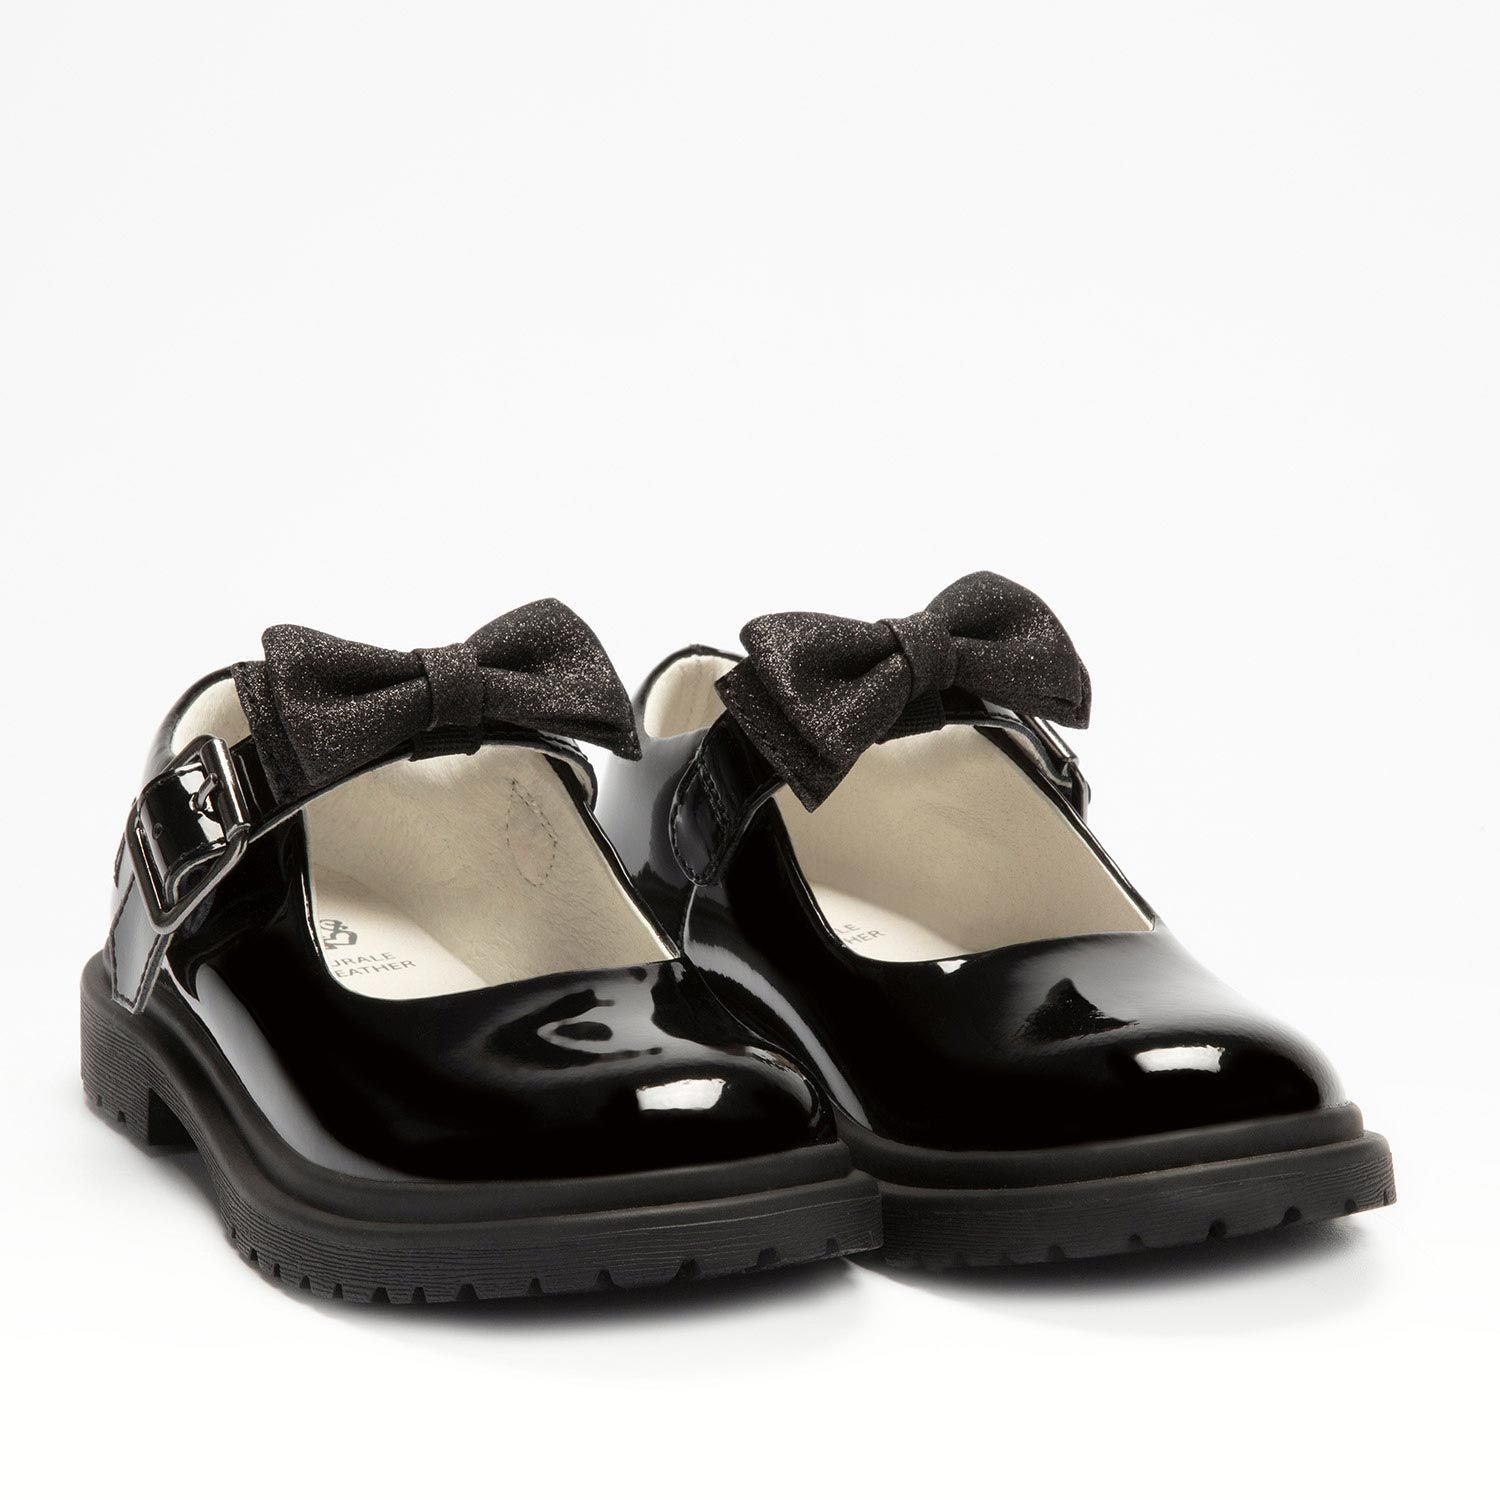 A pair of girls chunky Mary Jane school shoes by Lelli Kelly, style LK8359 Mollie, in black patent leather with buckle fastening and detachable fabric bow. Angled view.